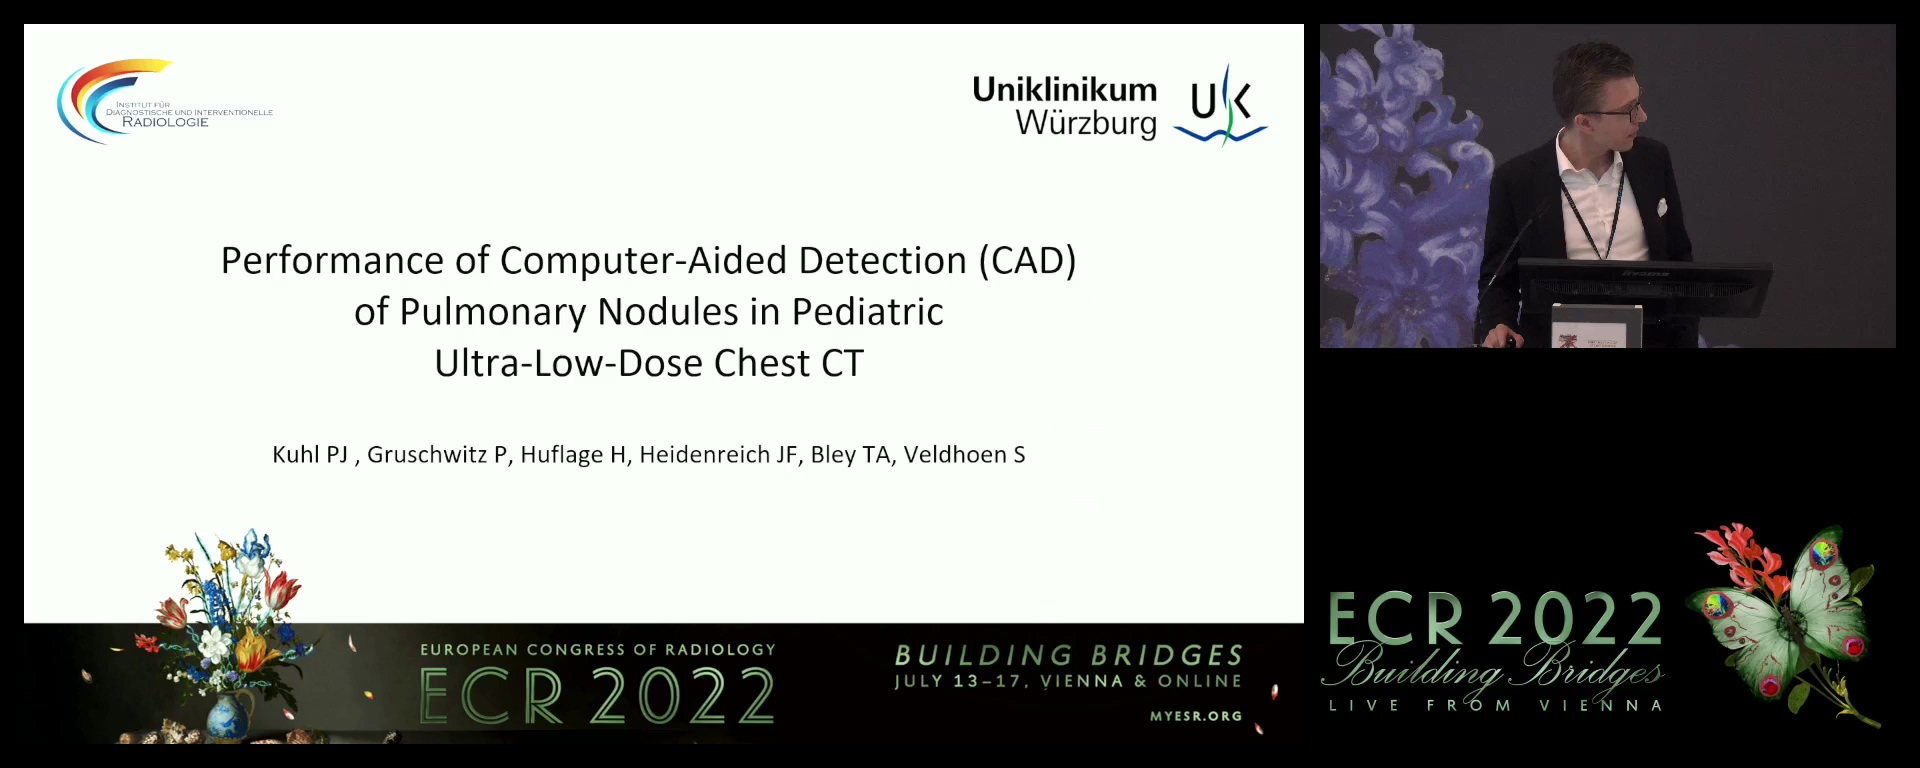 Performance and dose dependency of computer-aided detection (CAD) of pulmonary nodules in tin-filtered paediatric ultra low dose chest CT - Philipp Josef Kuhl, Würzburg / DE